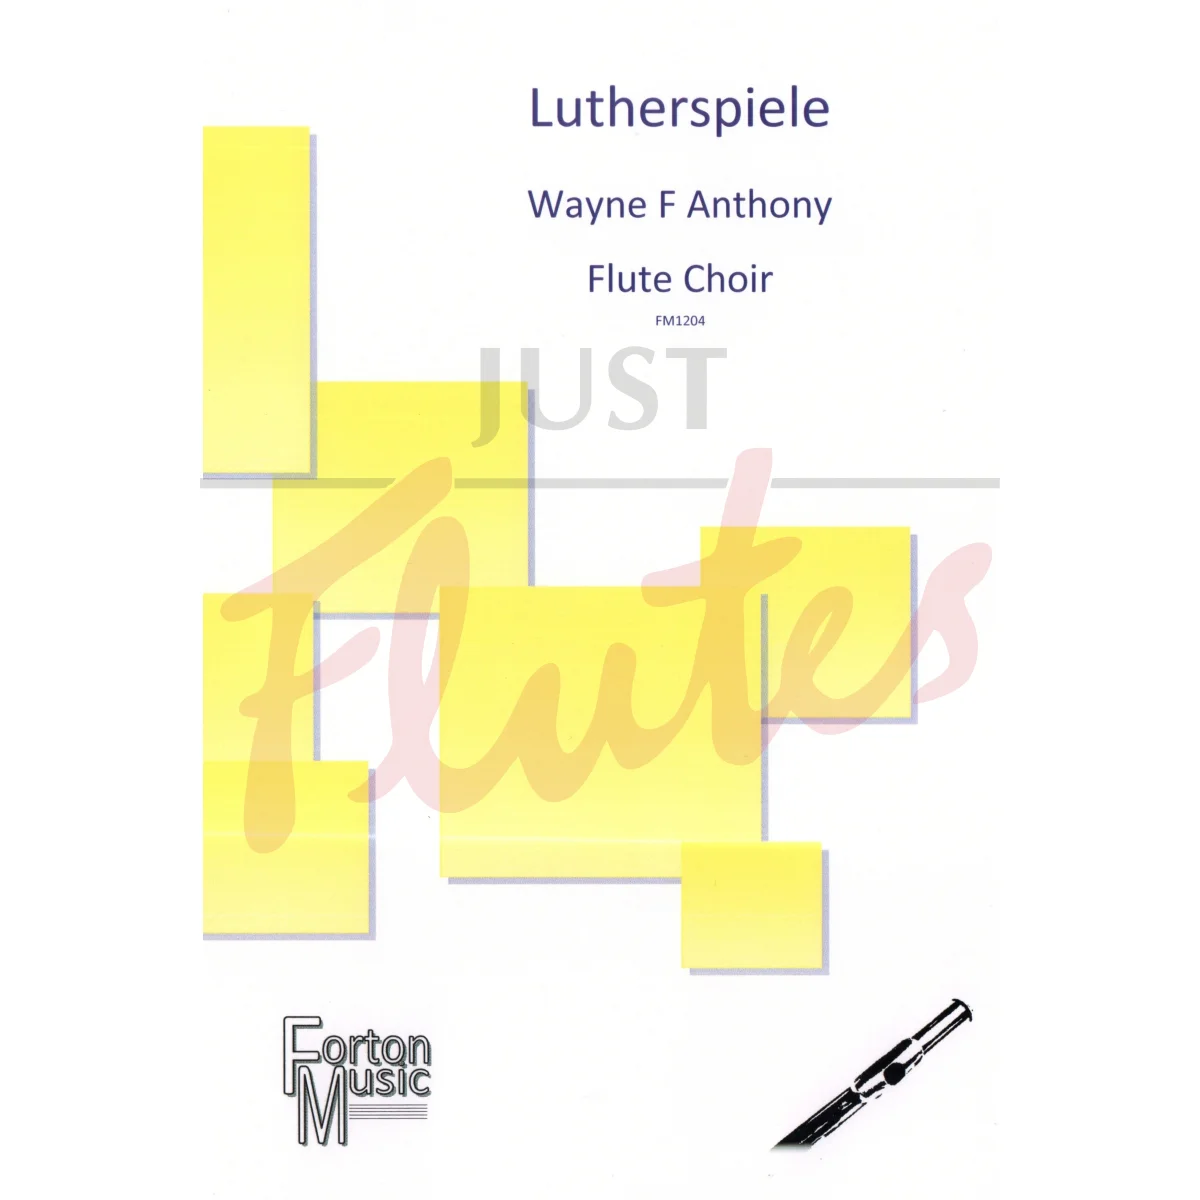 Lutherspiele for Flute Choir